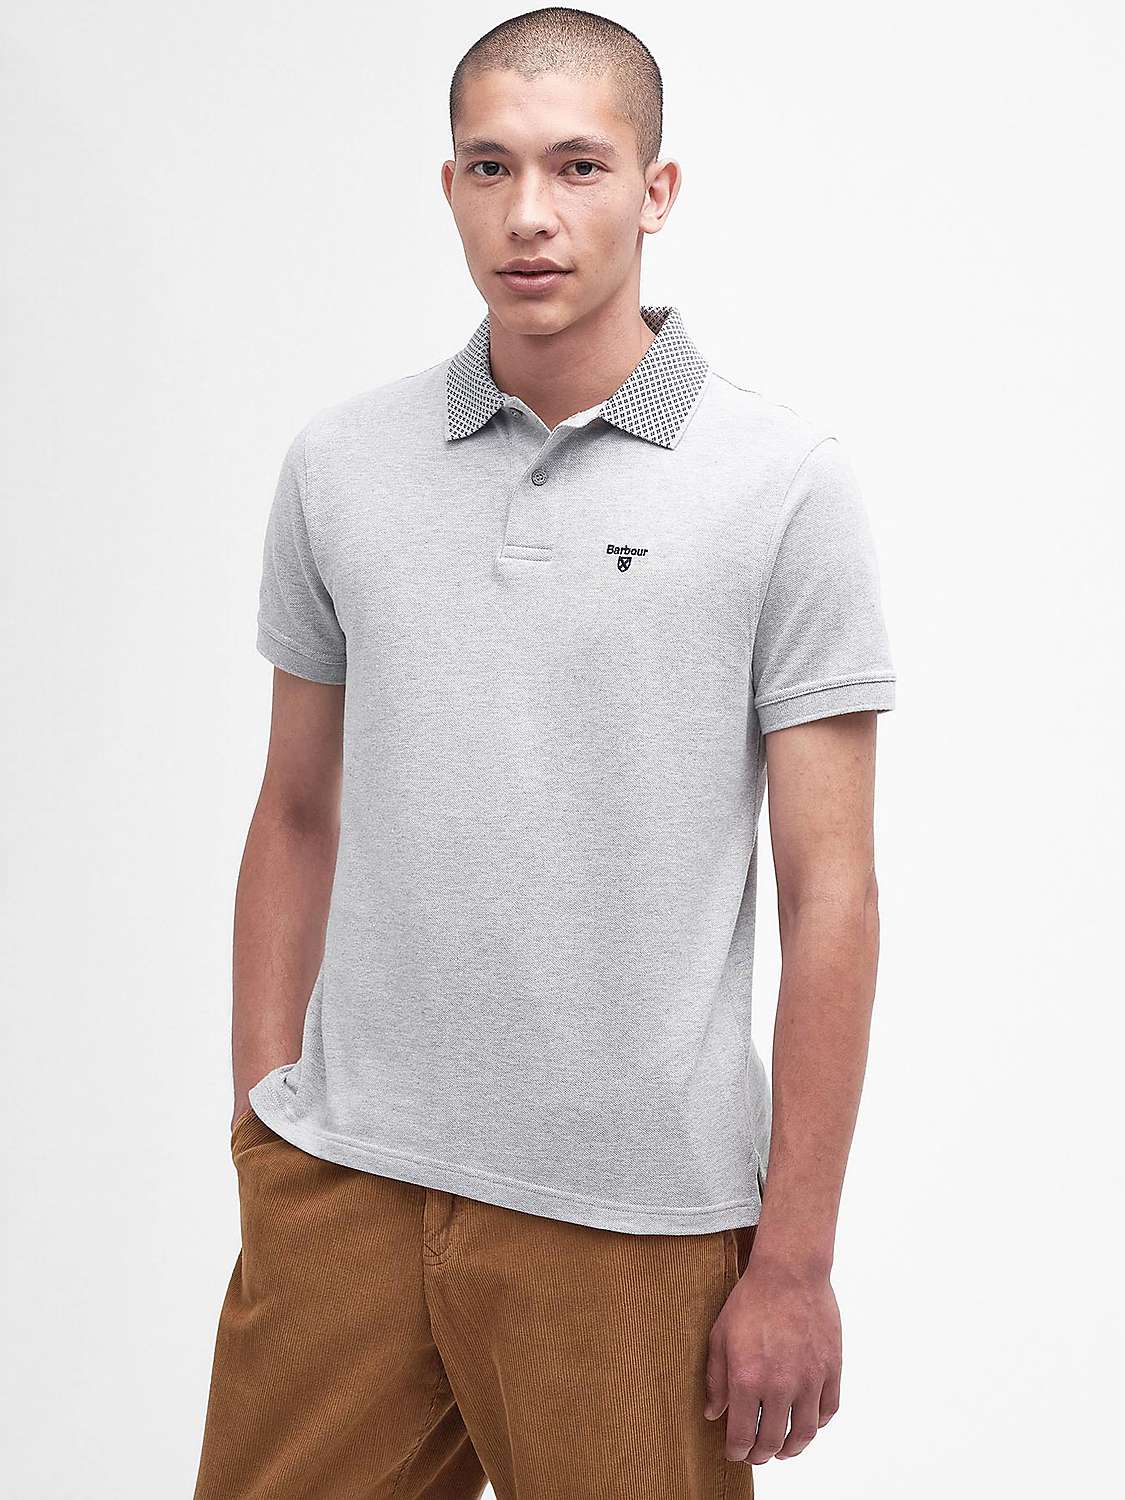 Buy Barbour Bothain Polo Shirt, Grey Online at johnlewis.com